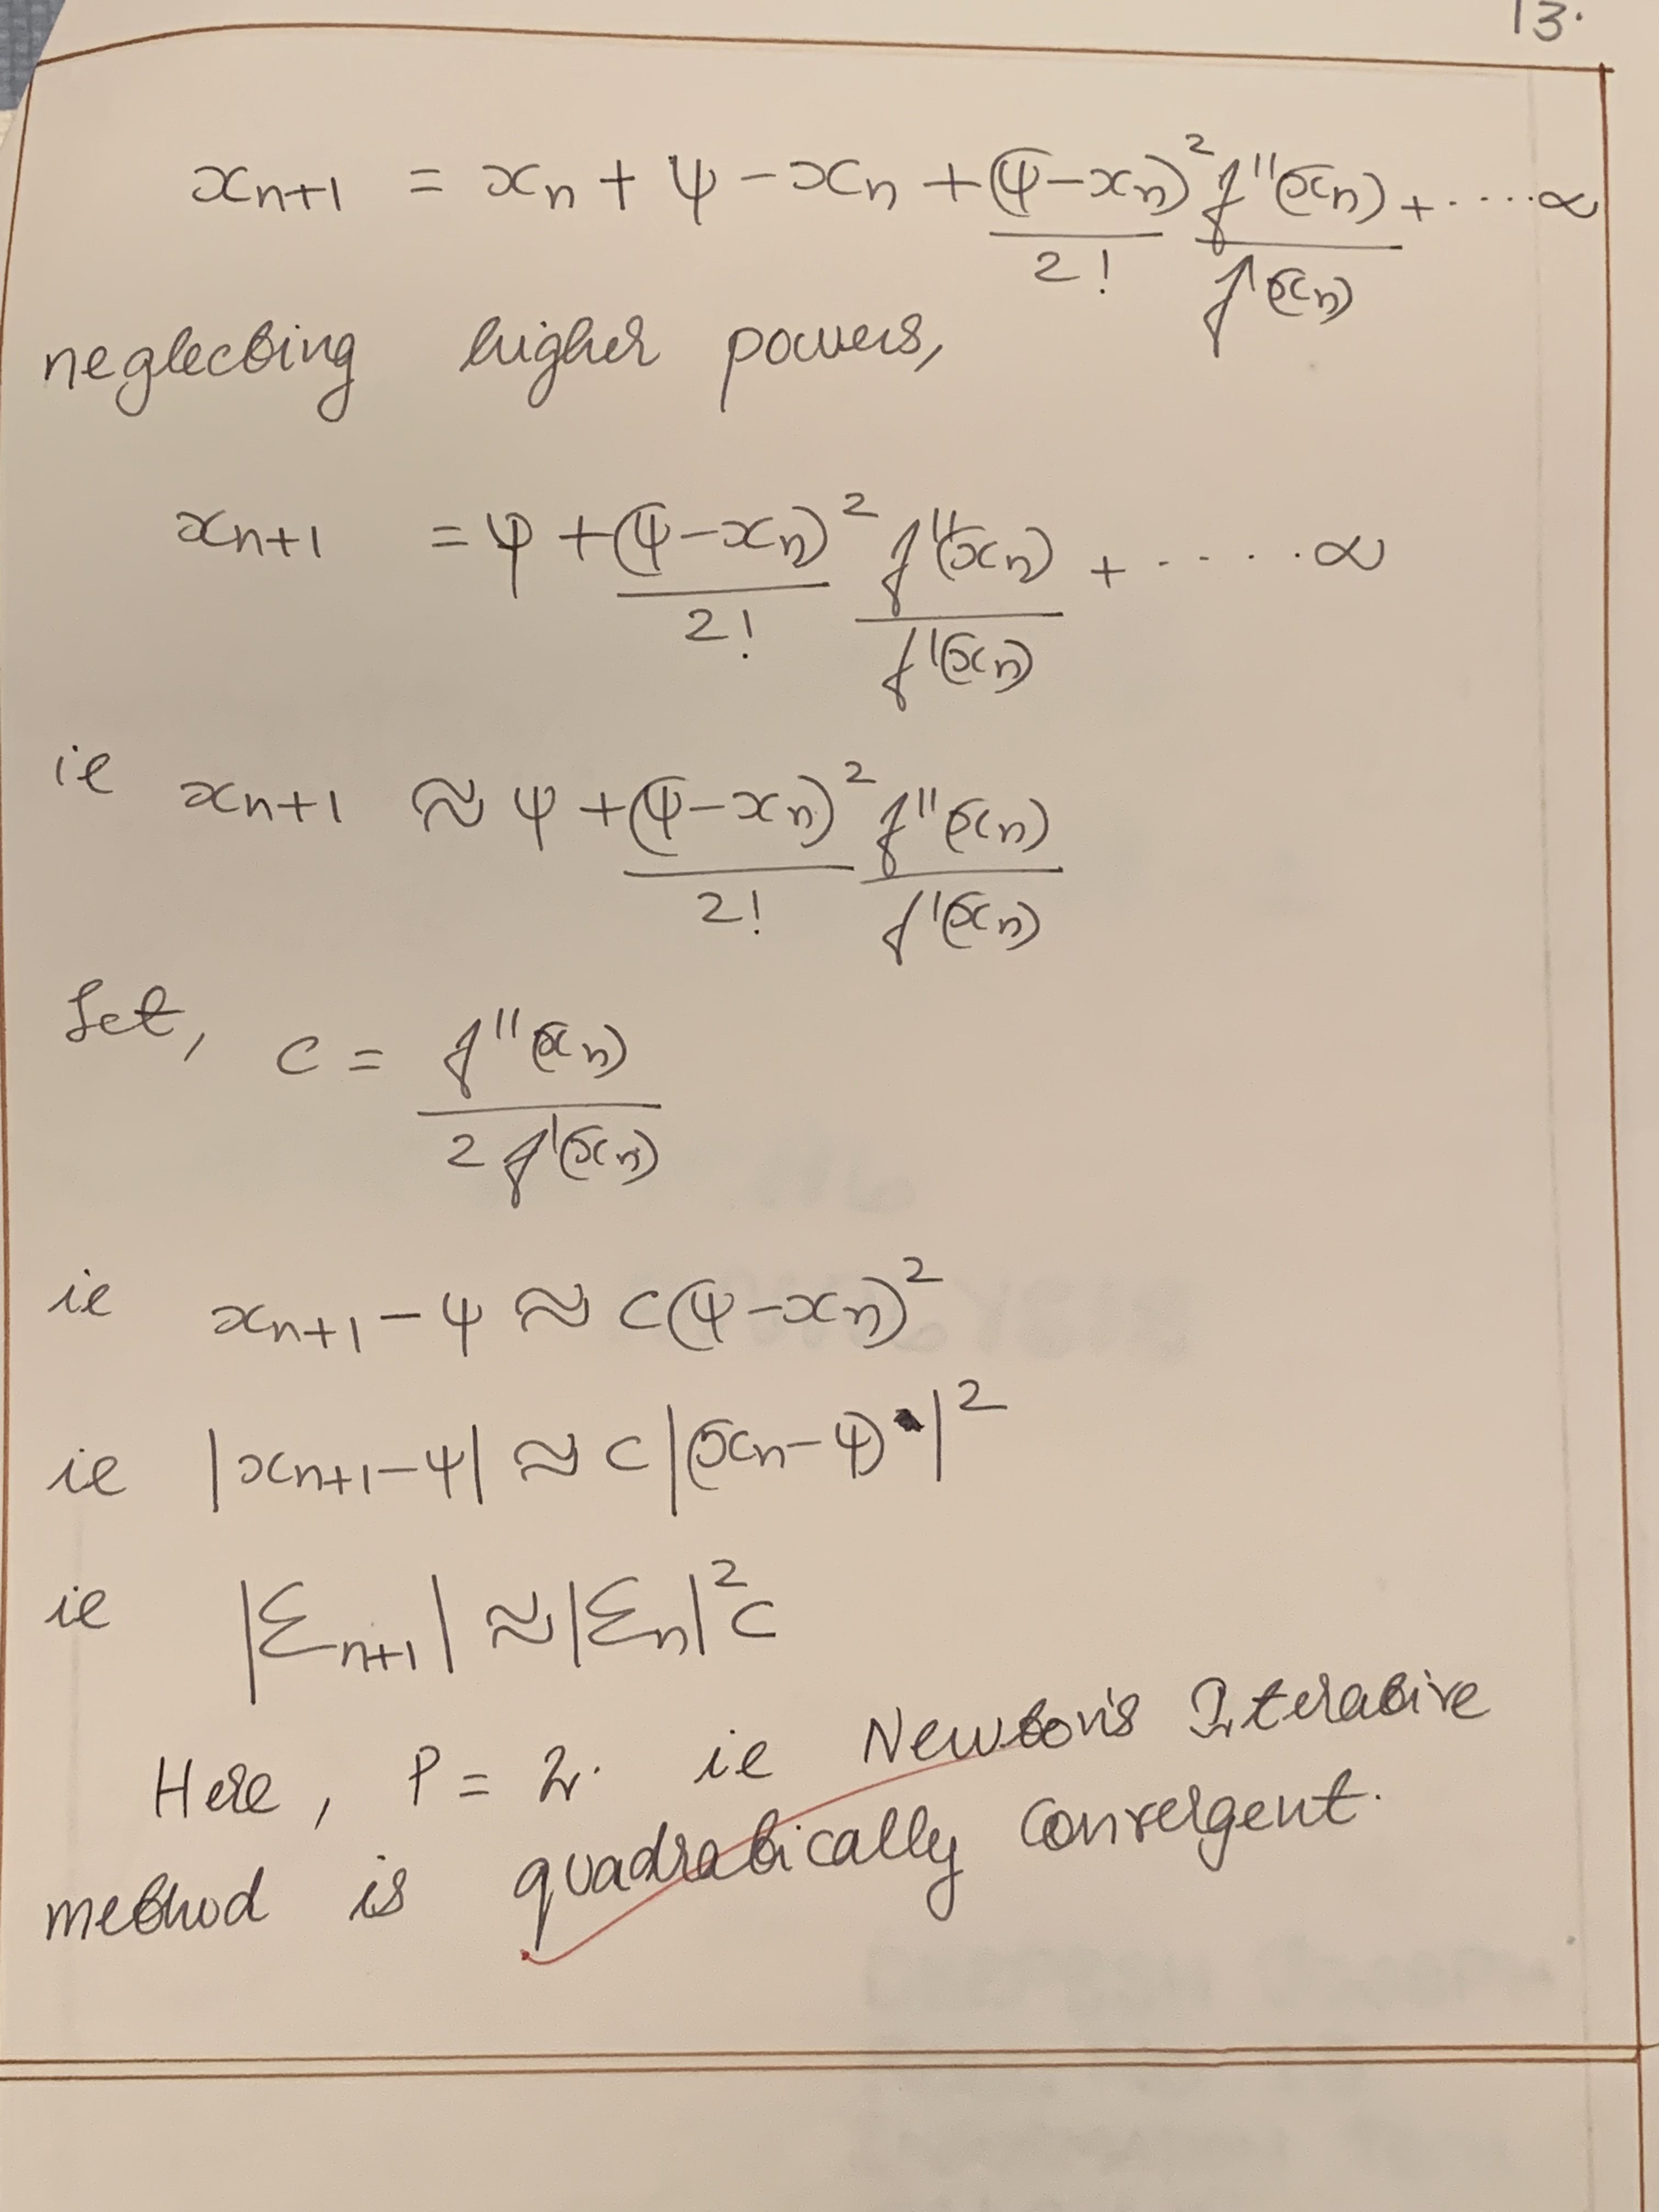 discuss-convergence-of-iterative-and-newton-raphson5